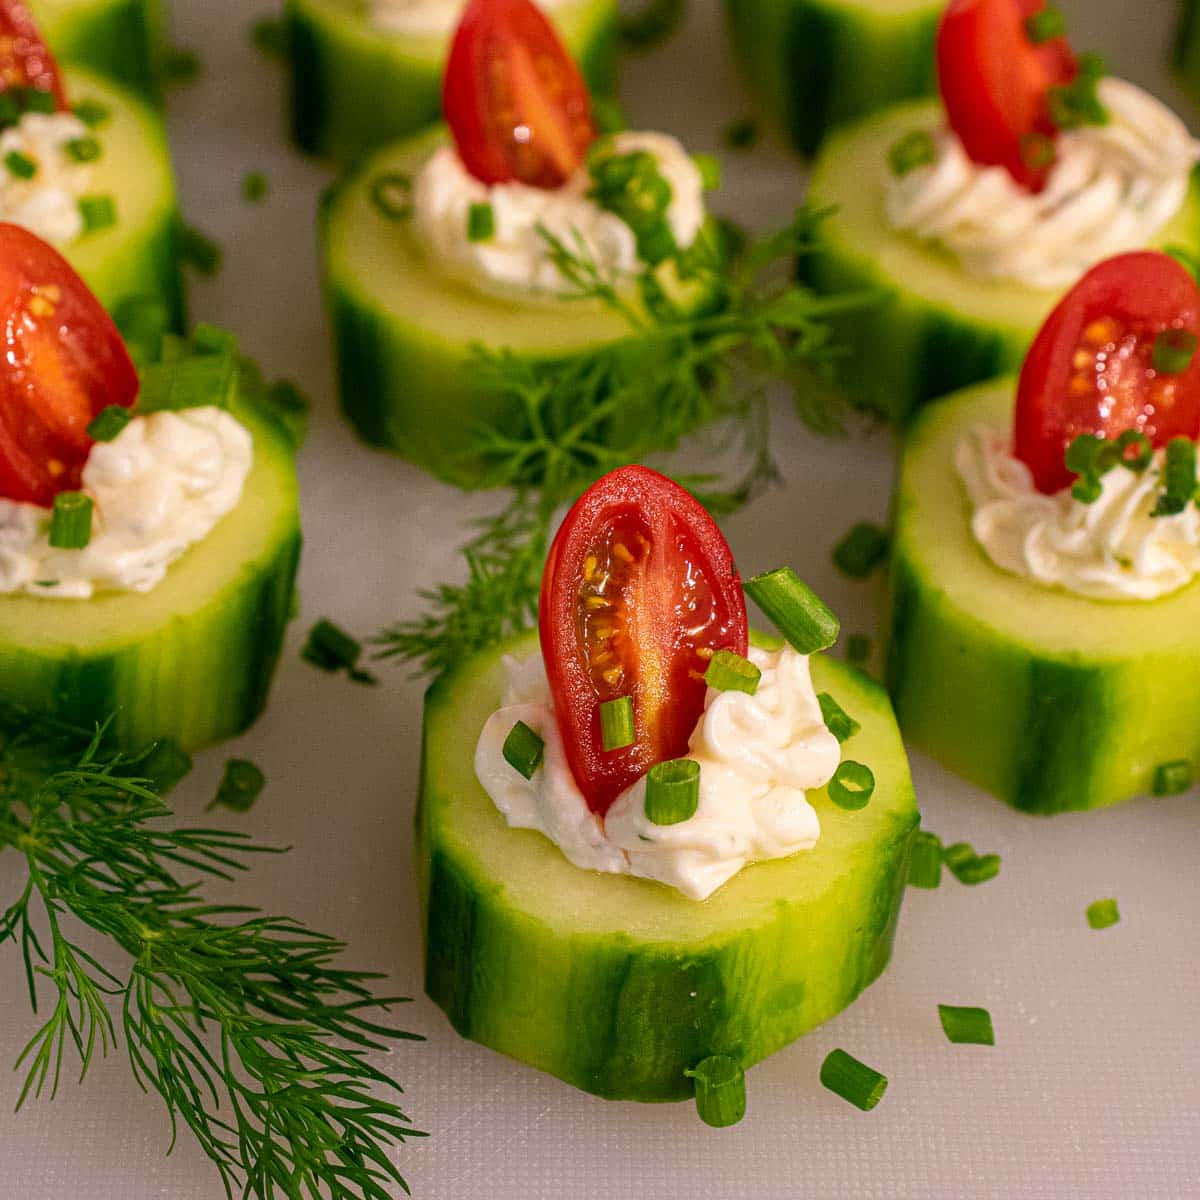 Cucumber appetizers with grape tomato halves and chive garnish.